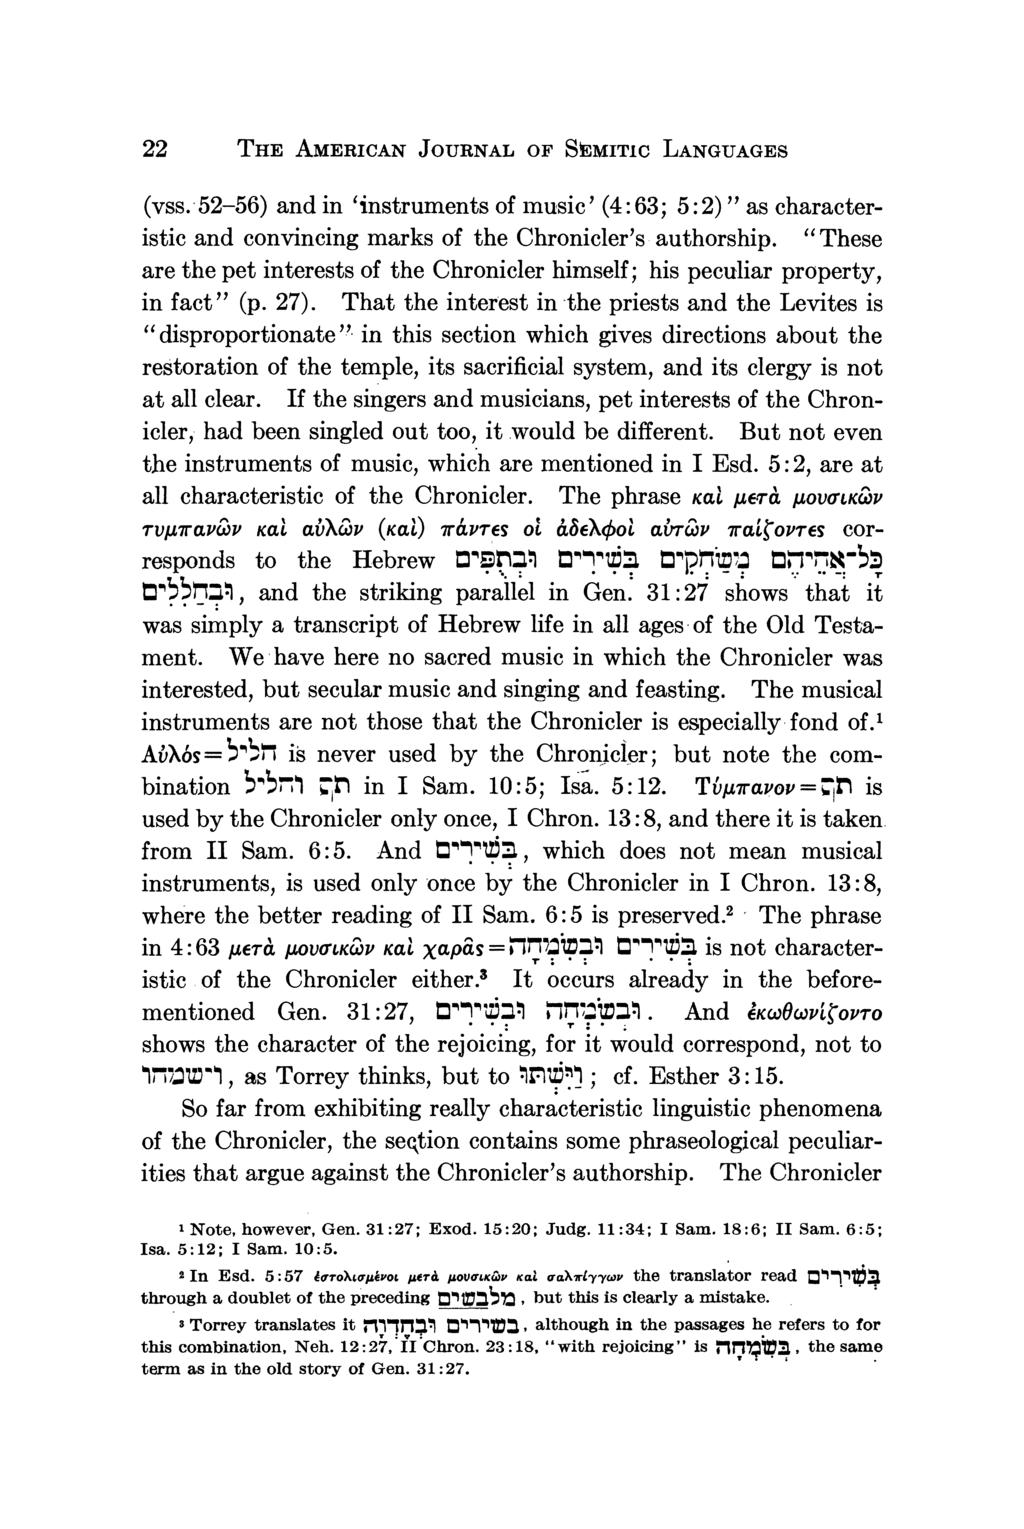 22 THE AMERICAN JOURNAL OF SEMITIC LANGUAGES (vss. 52-56) and in 'instruments of music' (4:63; 5:2)" as characteristic and convincing marks of the Chronicler's authorship.